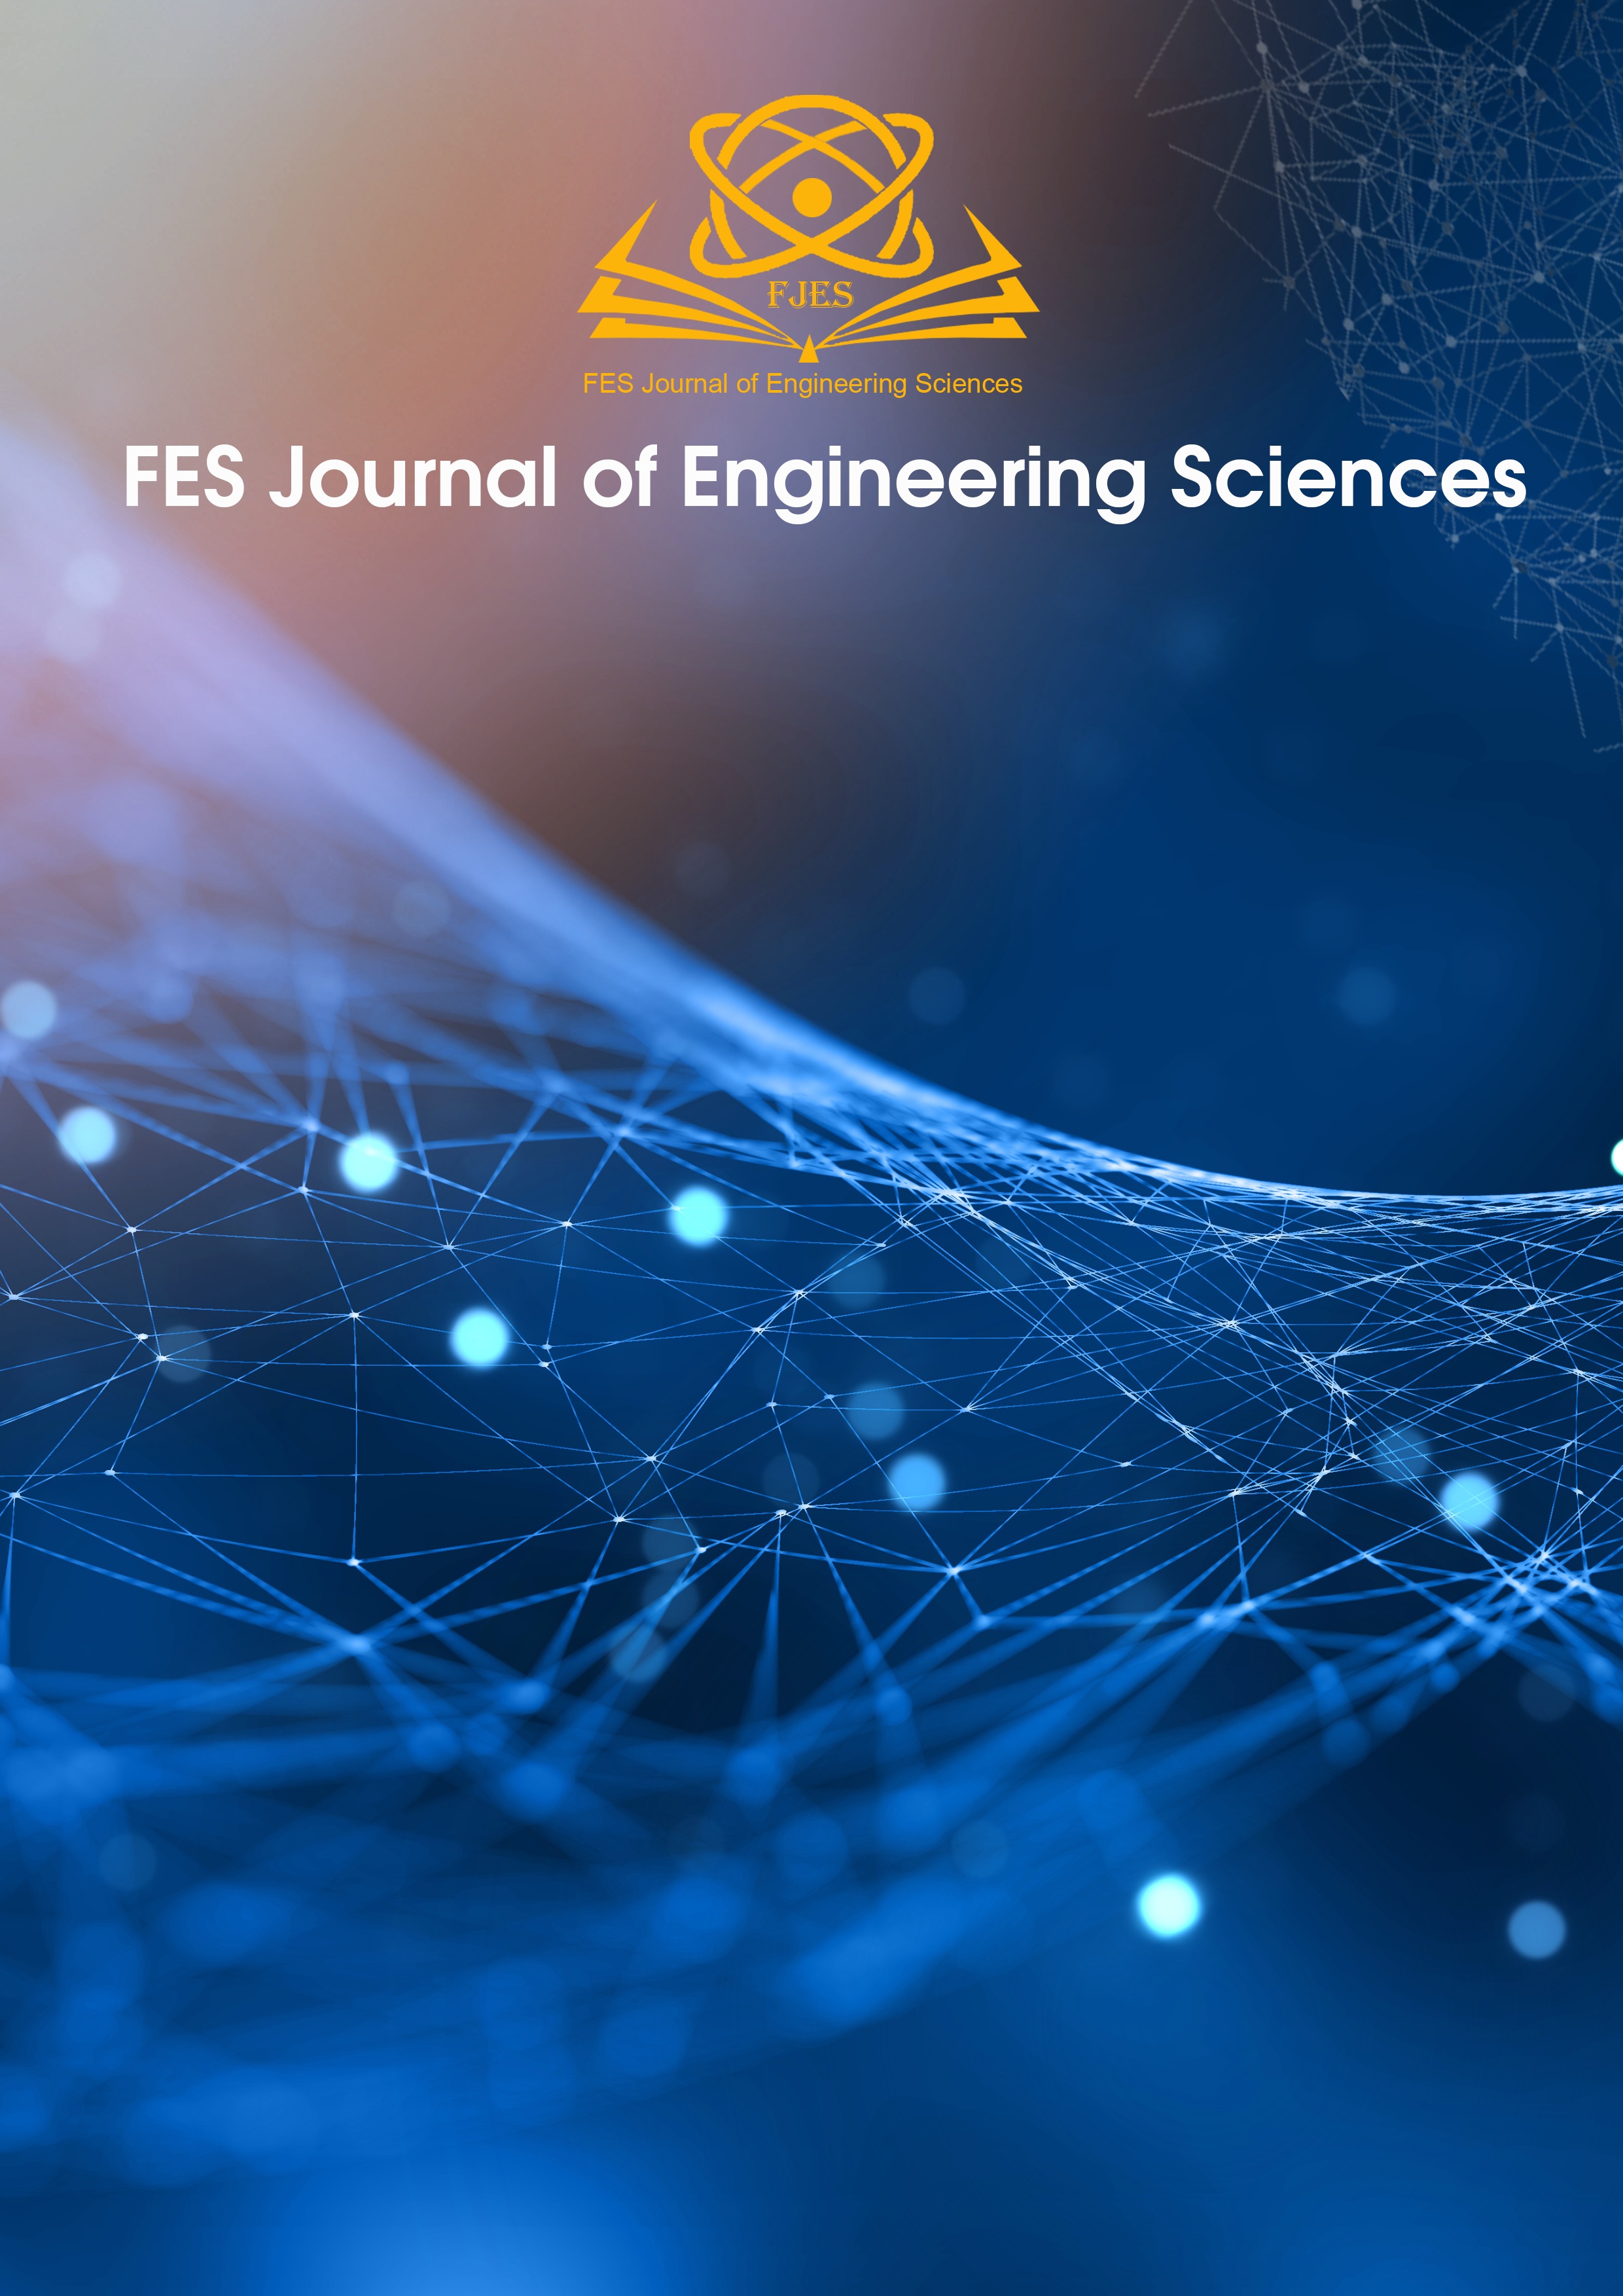 Engineering Sciences and Technology